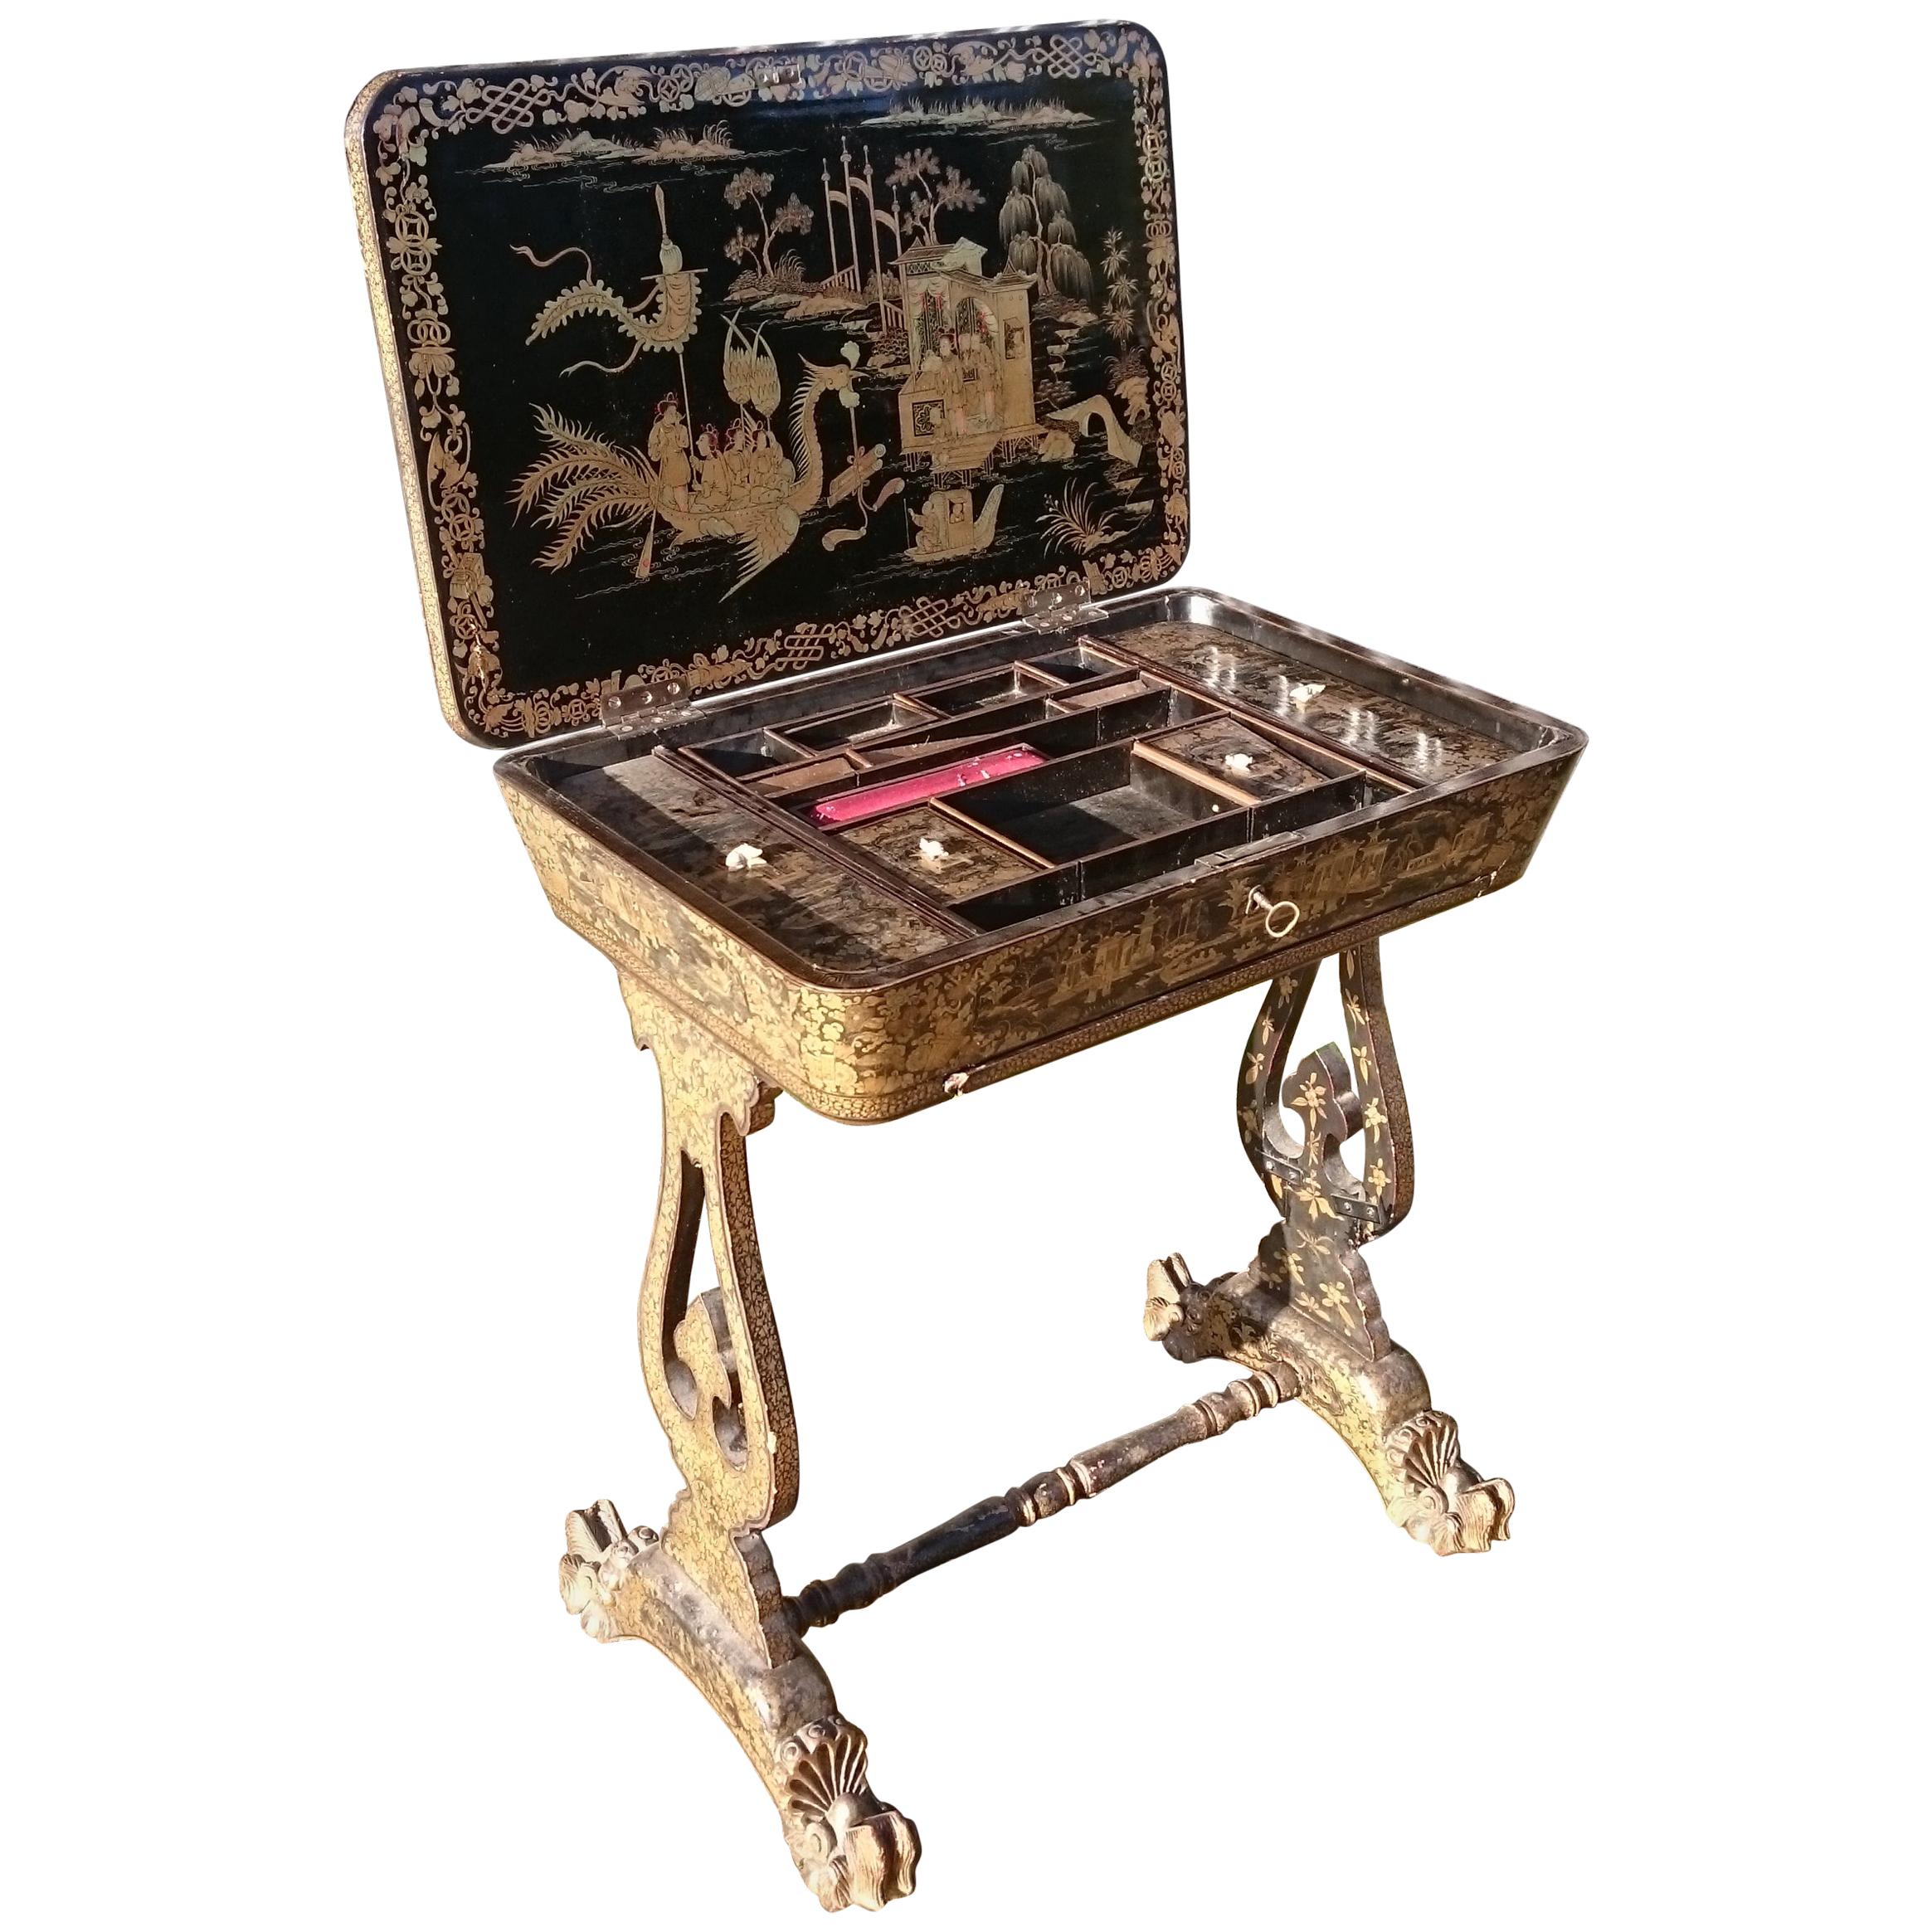 Early 19th Century Chinese Lacquer Work Table / Sewing Table For Sale